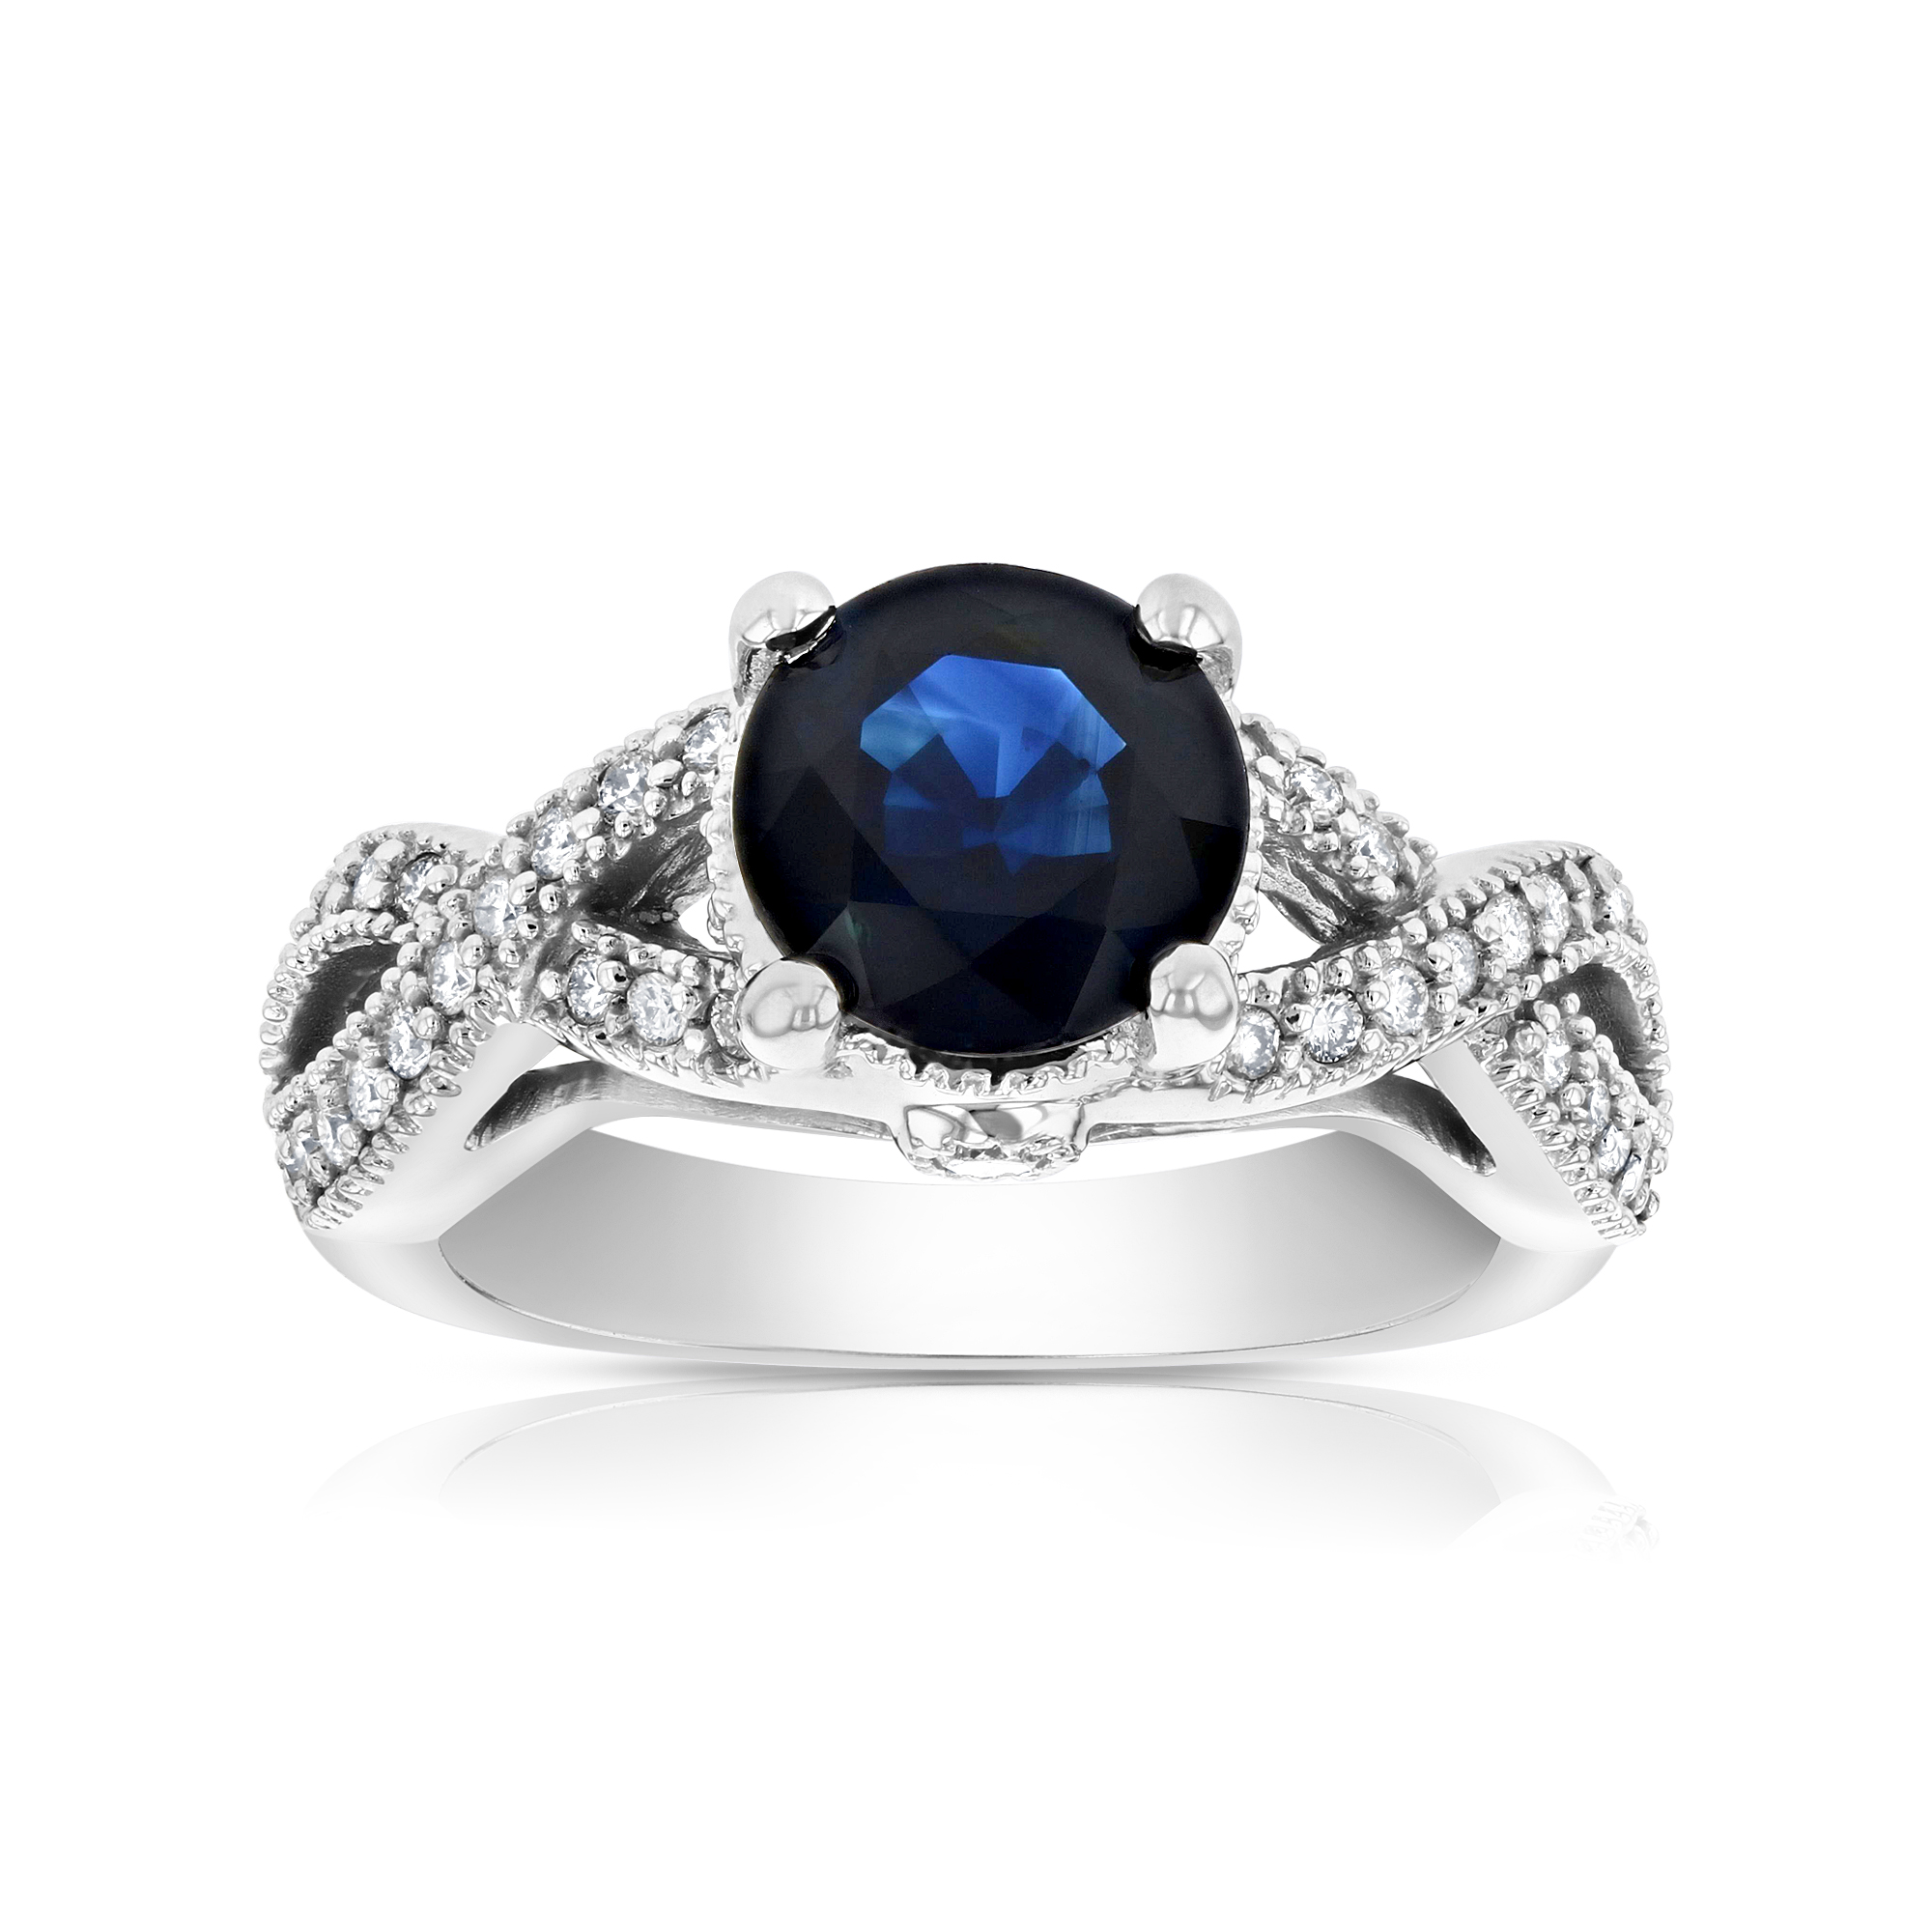 View 0.40ctw Diamond and Sapphire Ring in 14k Gold